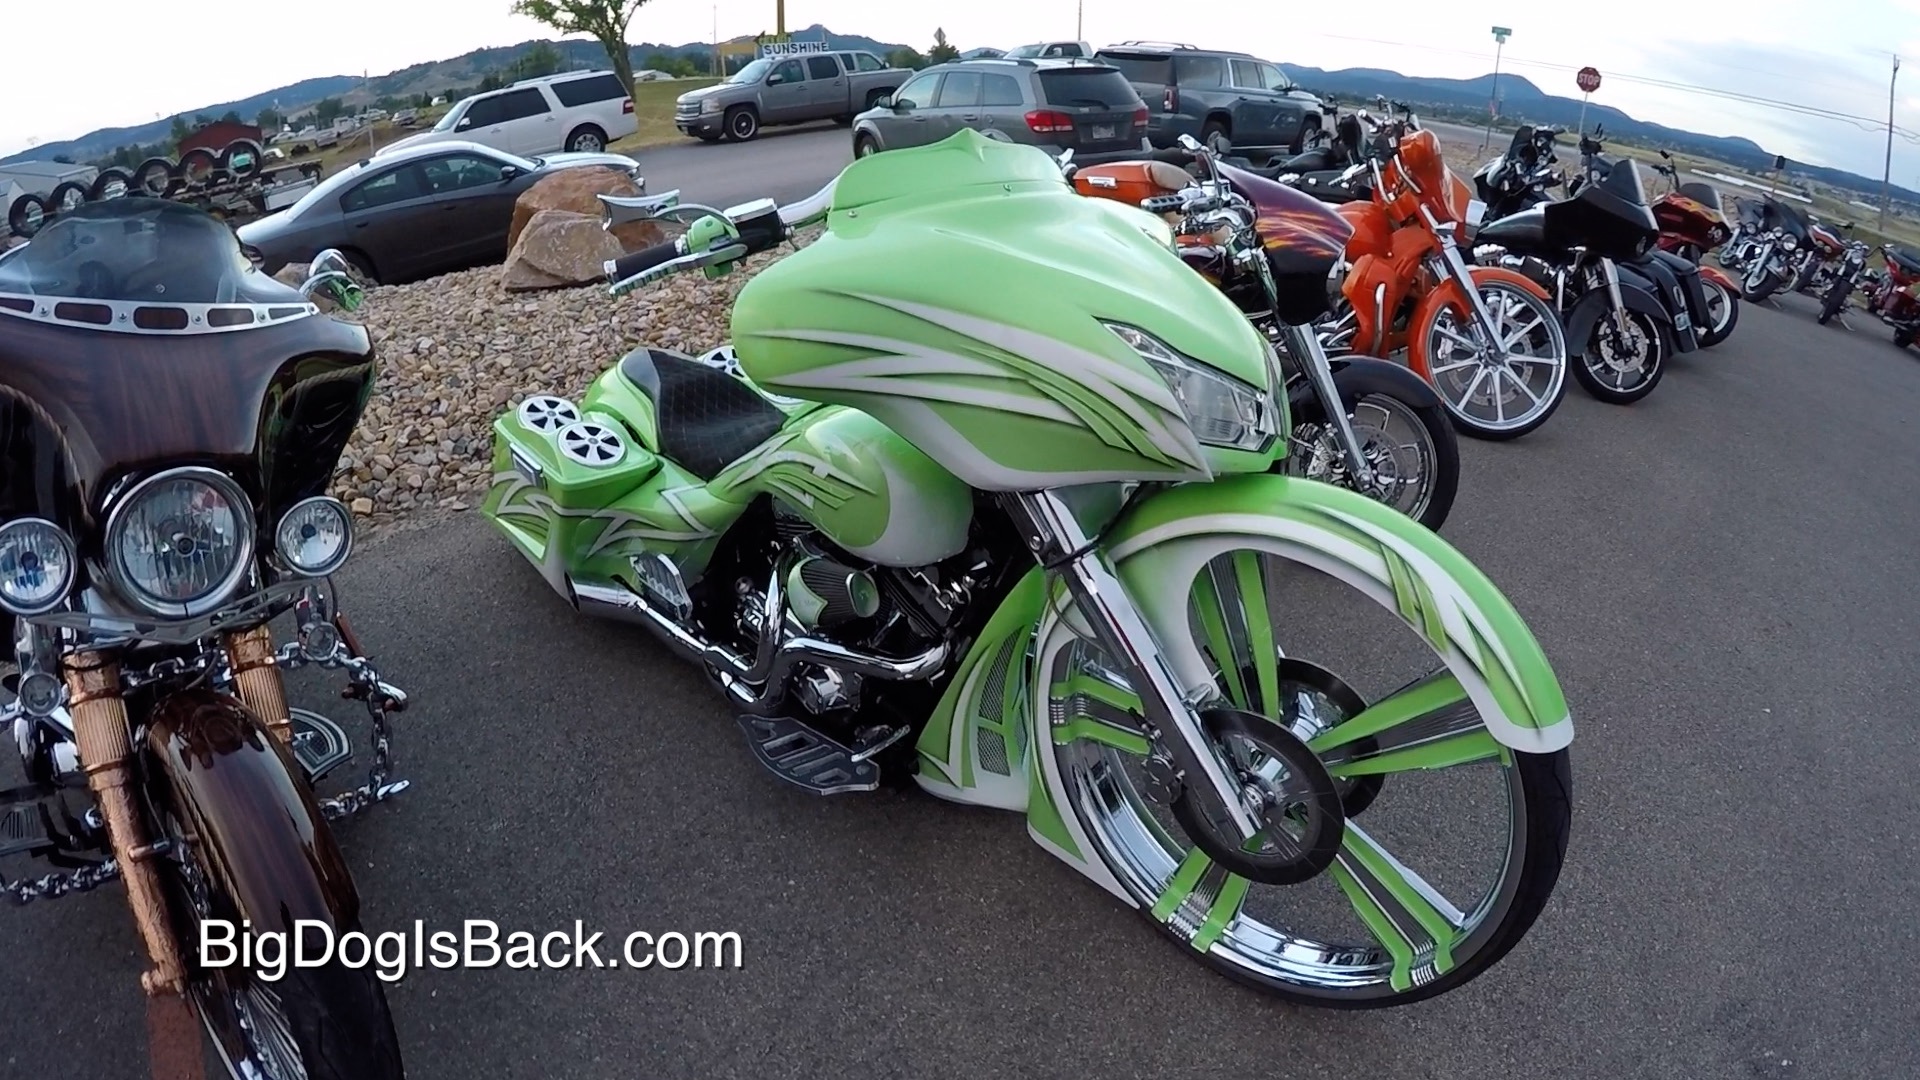 One of the bikes at the American Bagger Industry Party Sturgis 2016